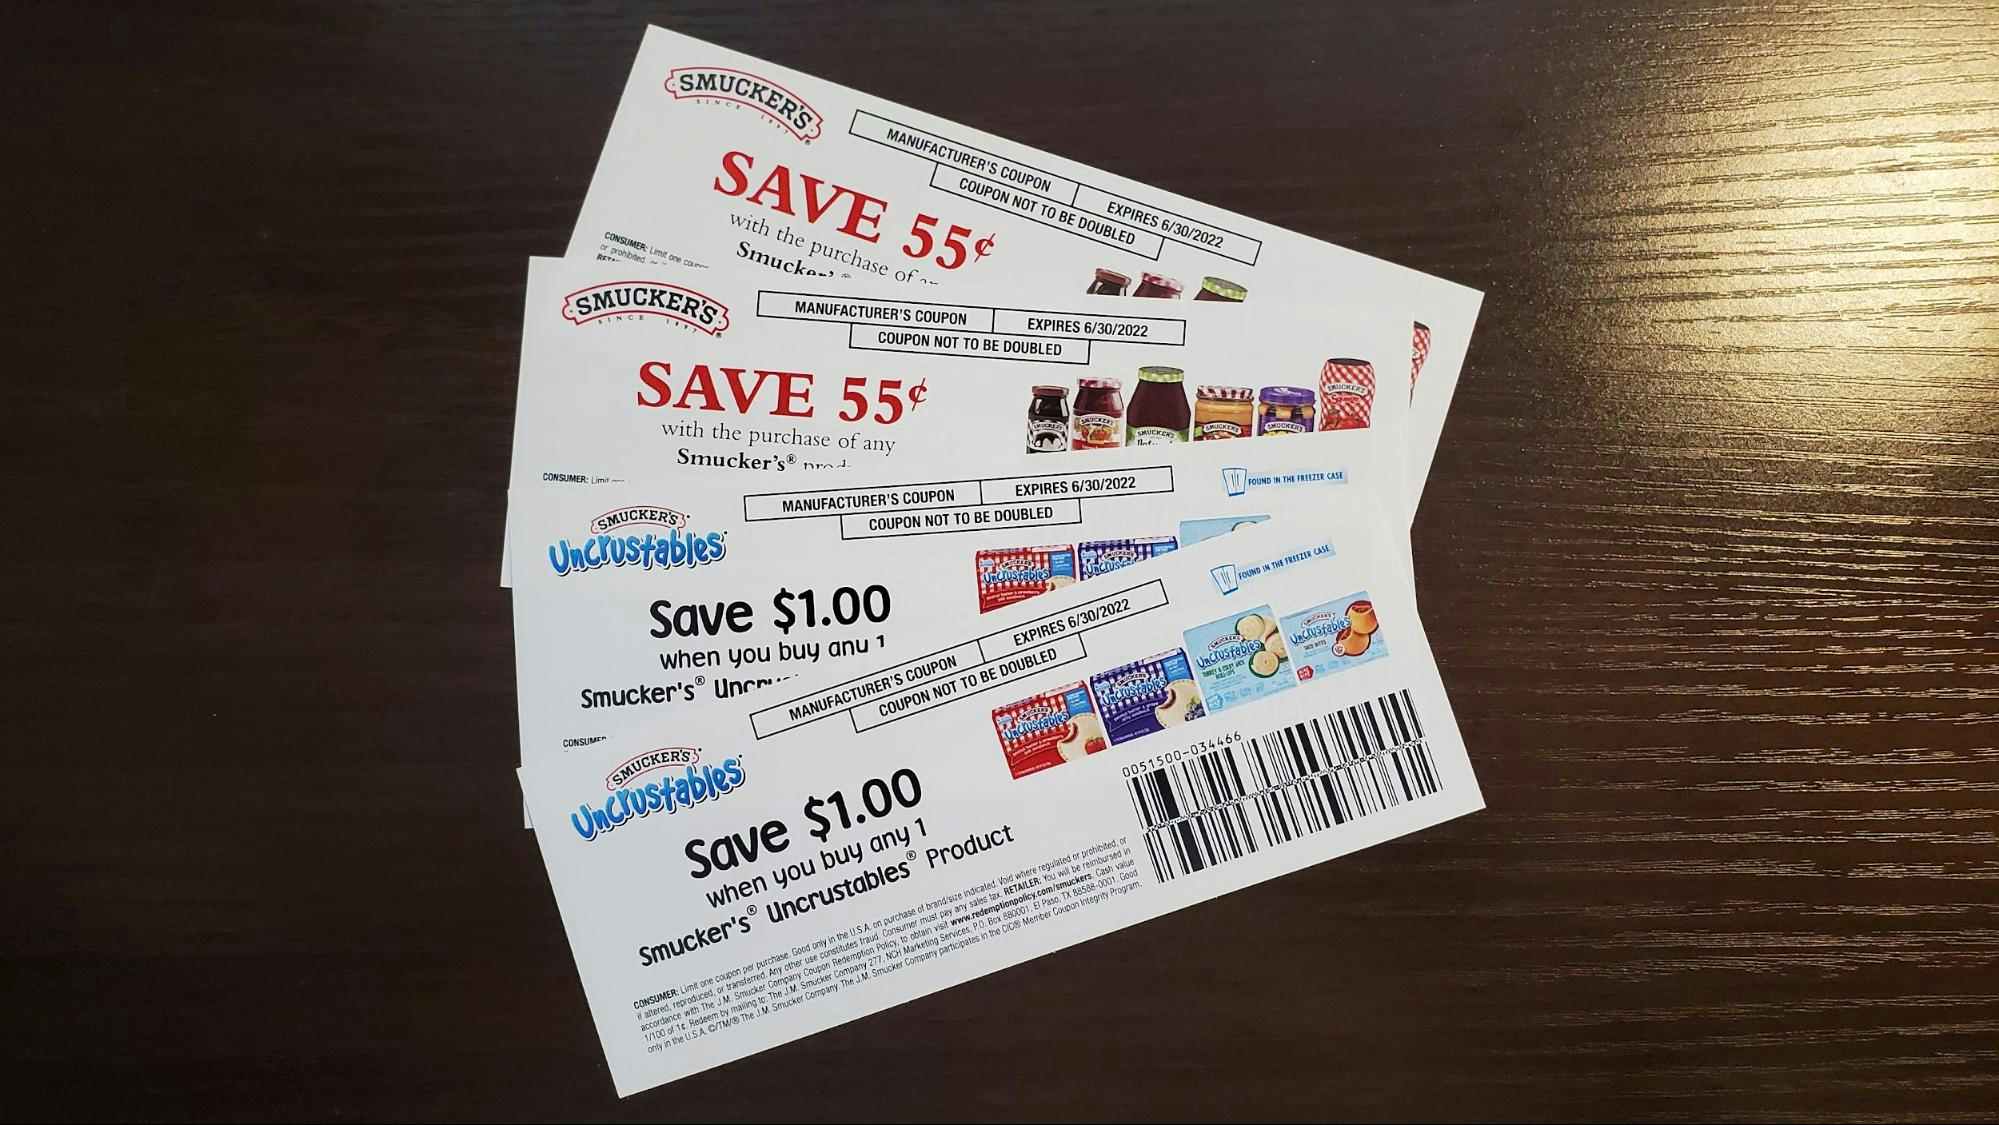 https://prod-cdn-thekrazycouponlady.imgix.net/wp-content/uploads/2021/09/free-coupons-smuckers-2021-1631225700-1631225700.jpg?auto=format&fit=fill&q=25